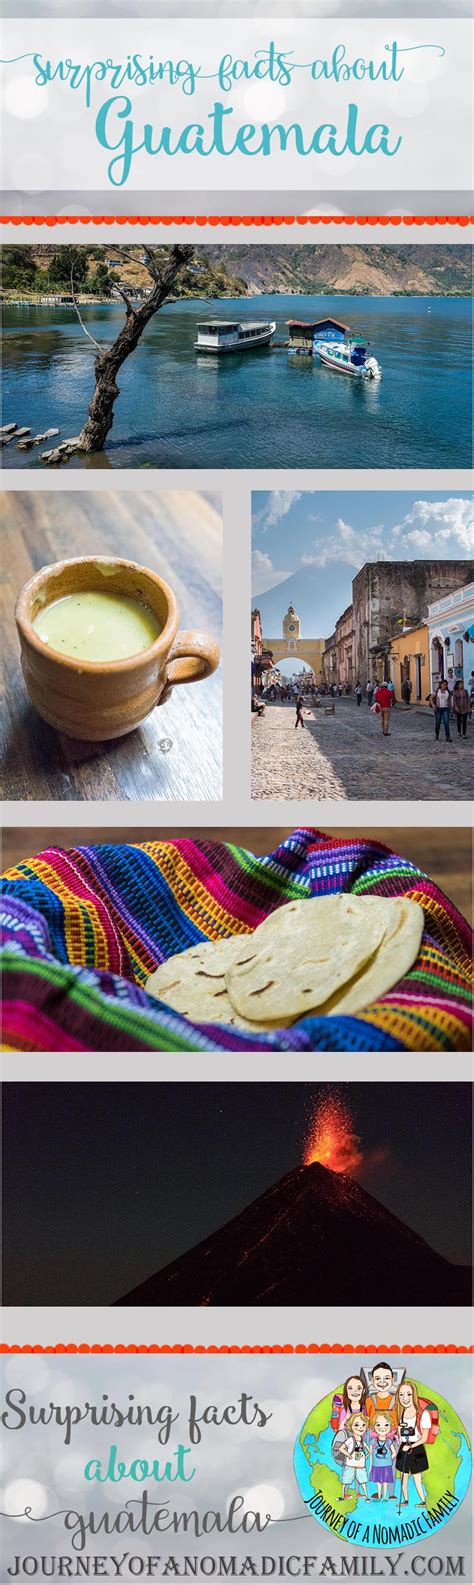 Facts About Guatemala That Might Surprise You Journey Of A Nomadic